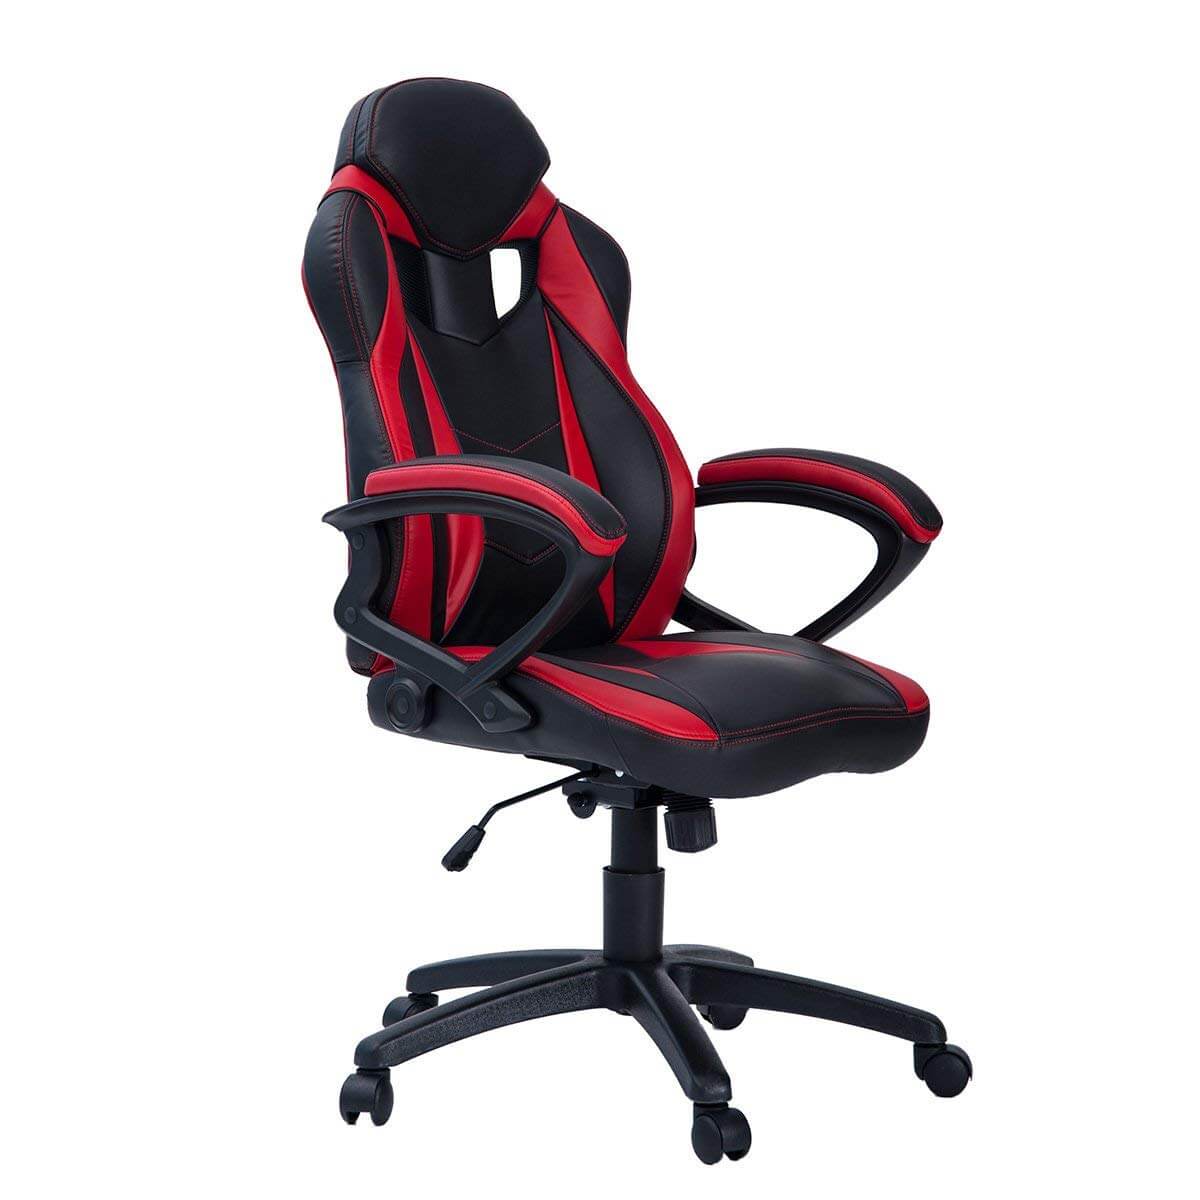 comfortable gaming chairs under 100